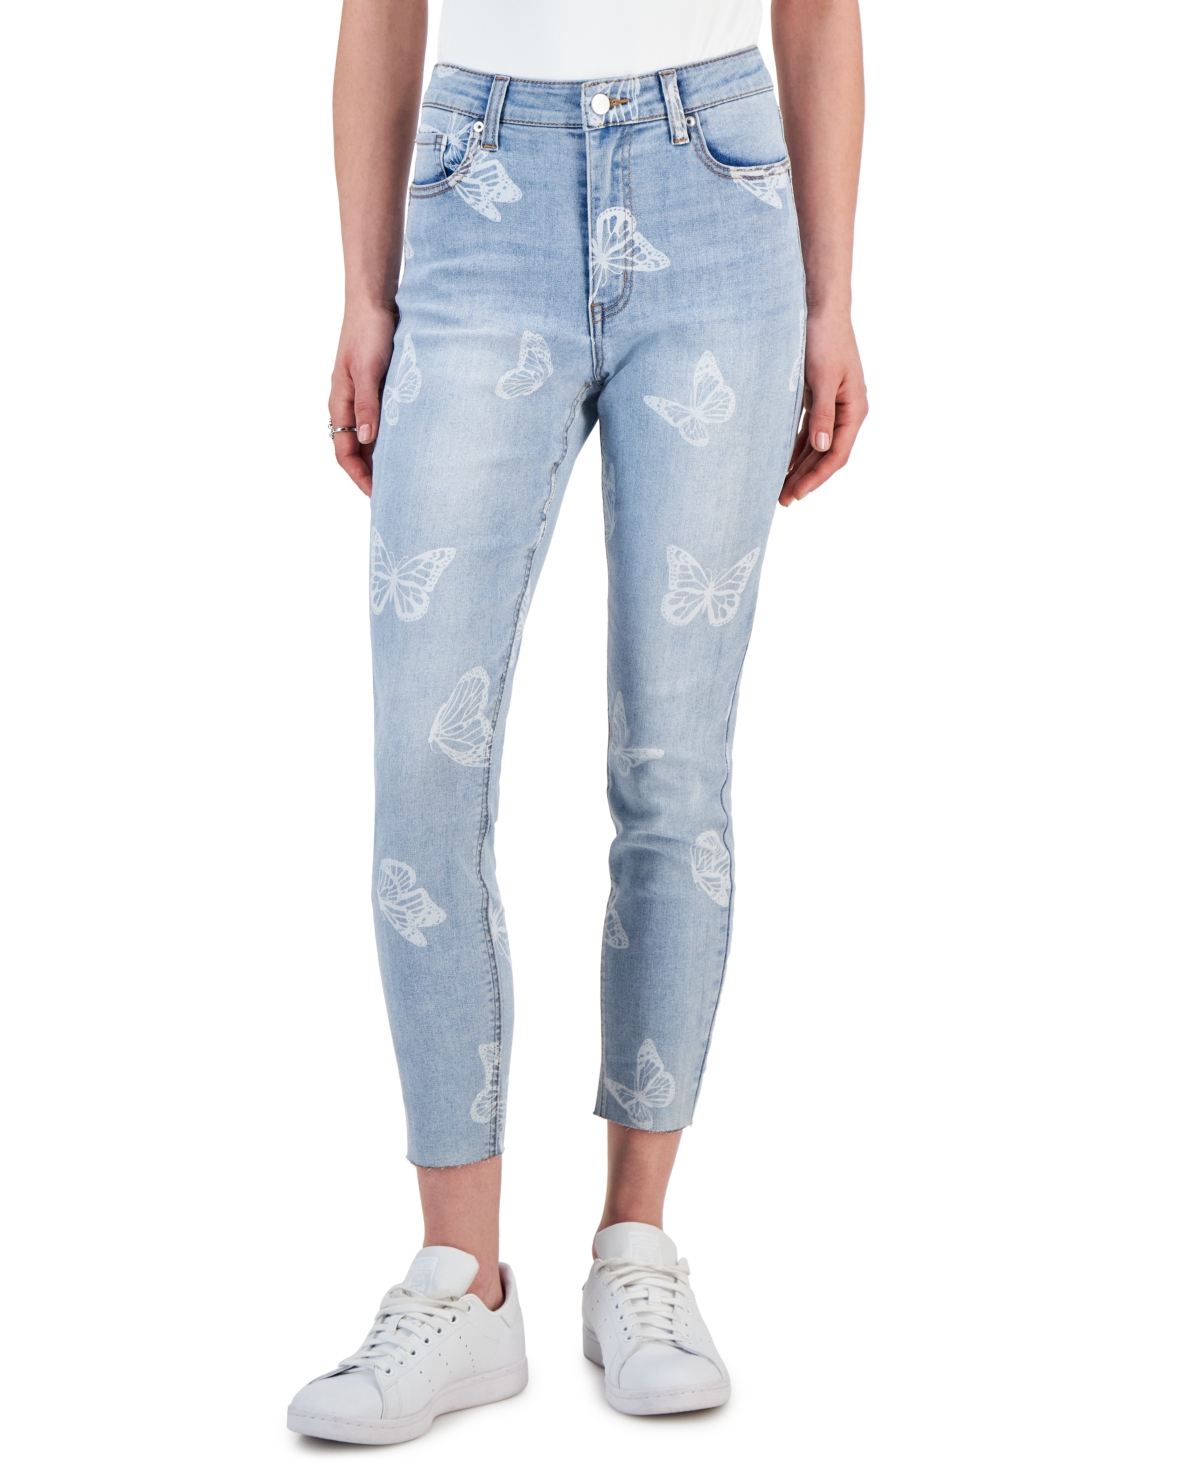 Juniors' Printed Mid-Rise Skinny Ankle Jeans, Created for Macy's - Vintage Wash